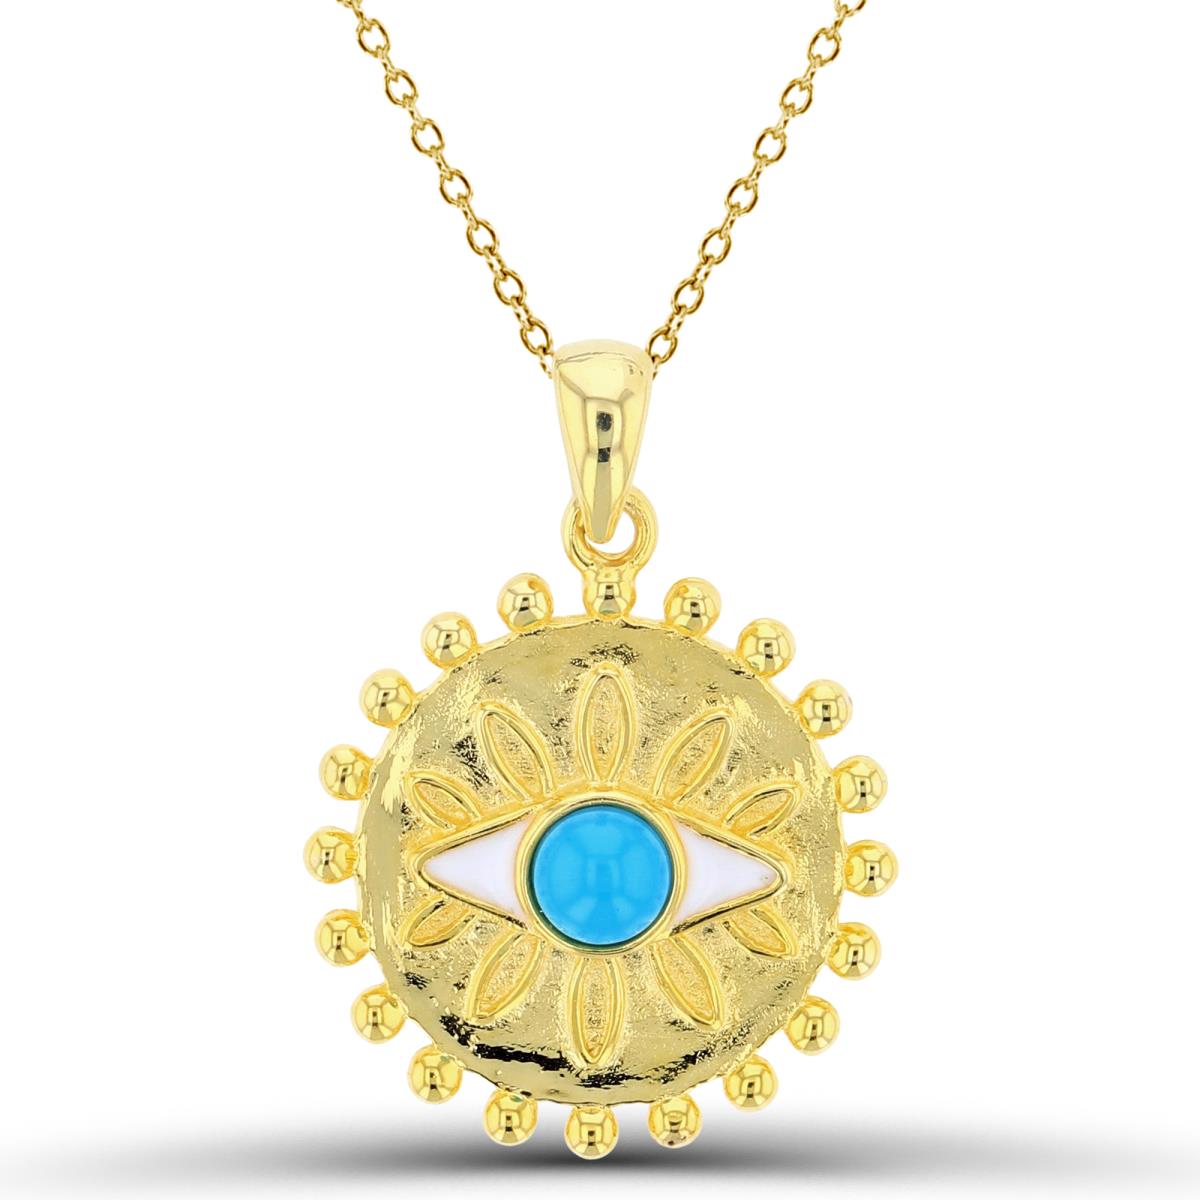 Sterling Silver+1Micron Yellow Gold 4mm Rnd Nano Turquoise/White Enamel Evil Eye on Textured Circle 18"Necklace